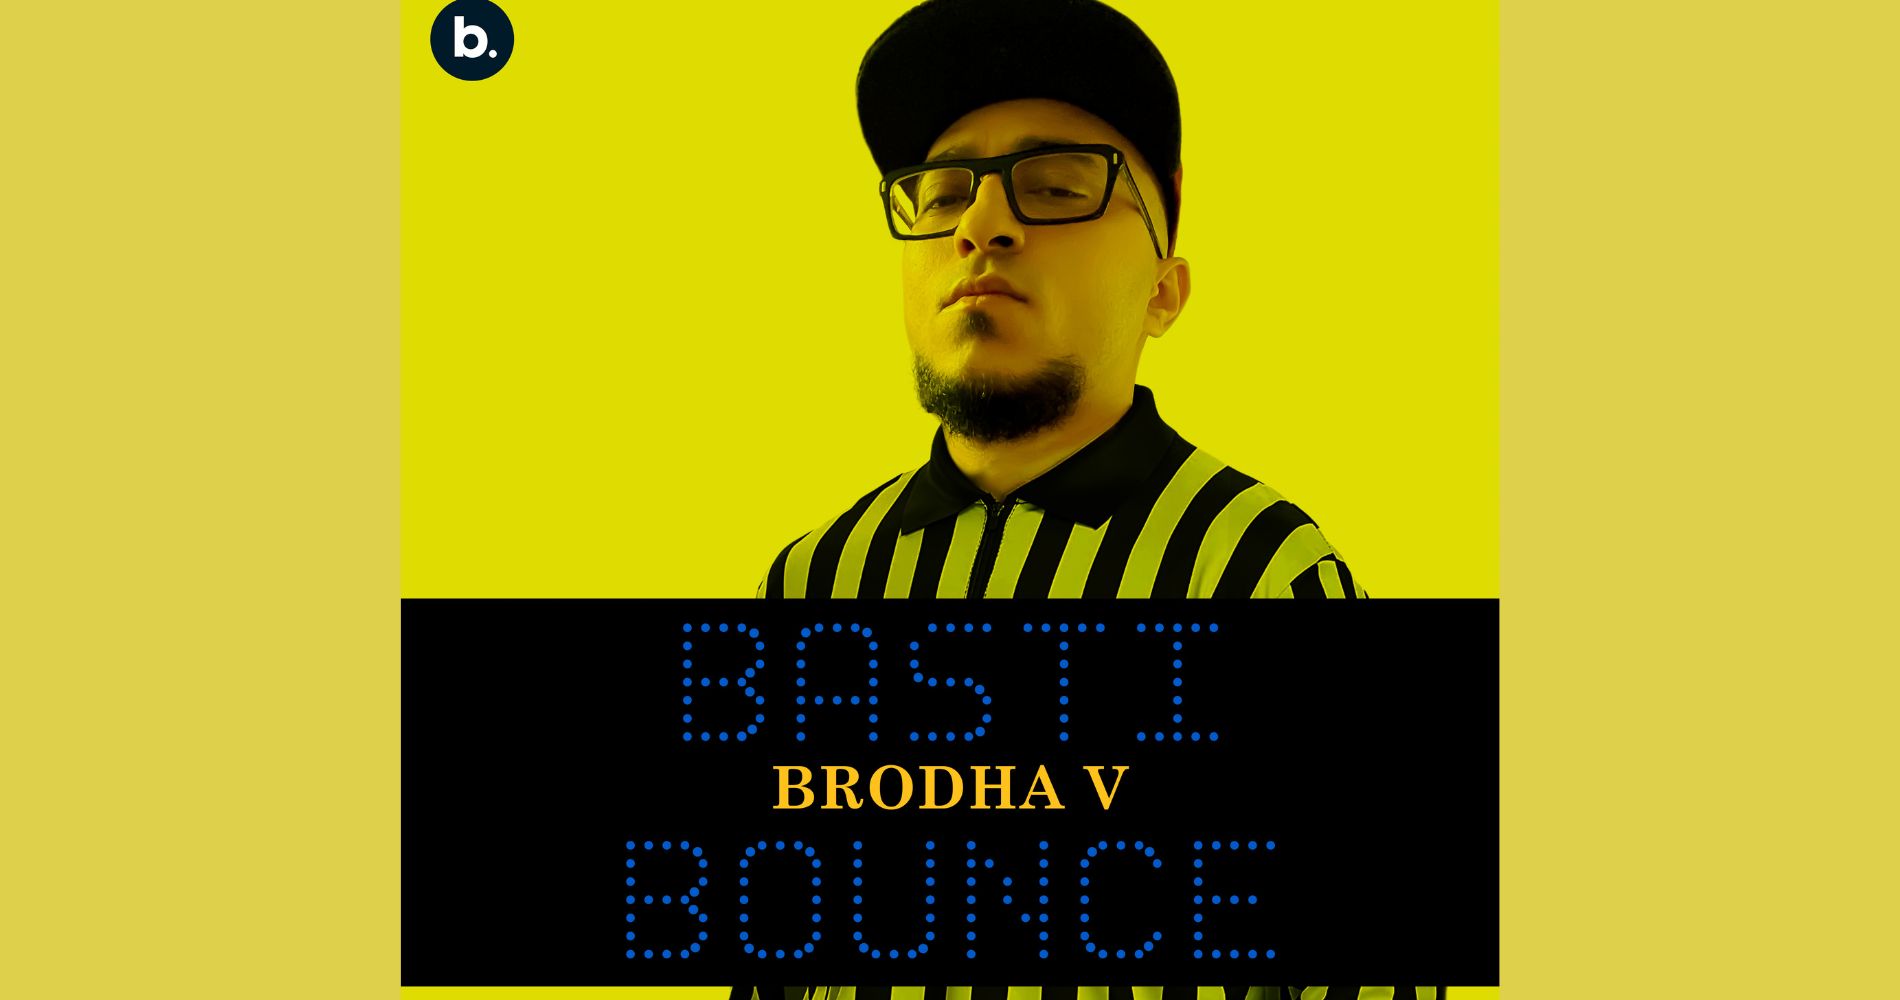 From His Basti To Your Playlist, Brodha V’s New Single